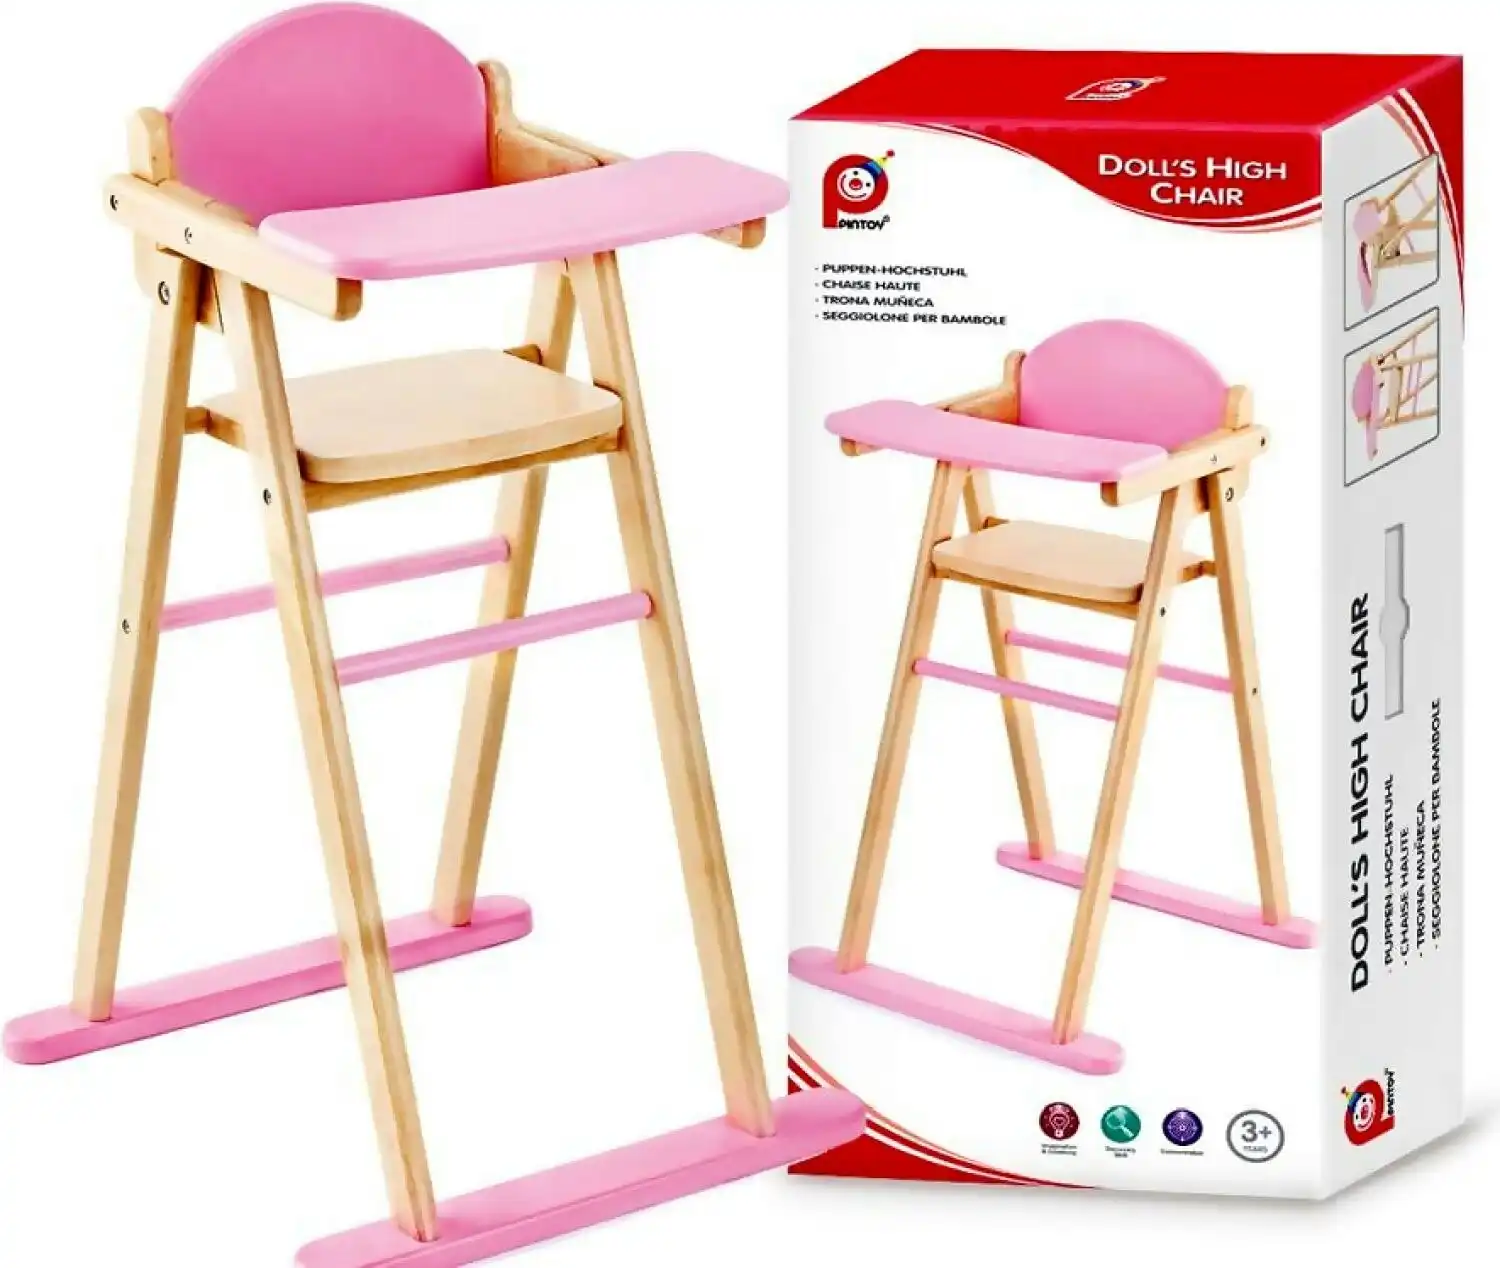 Dolls High Chair - Pintoy Wooden Toys